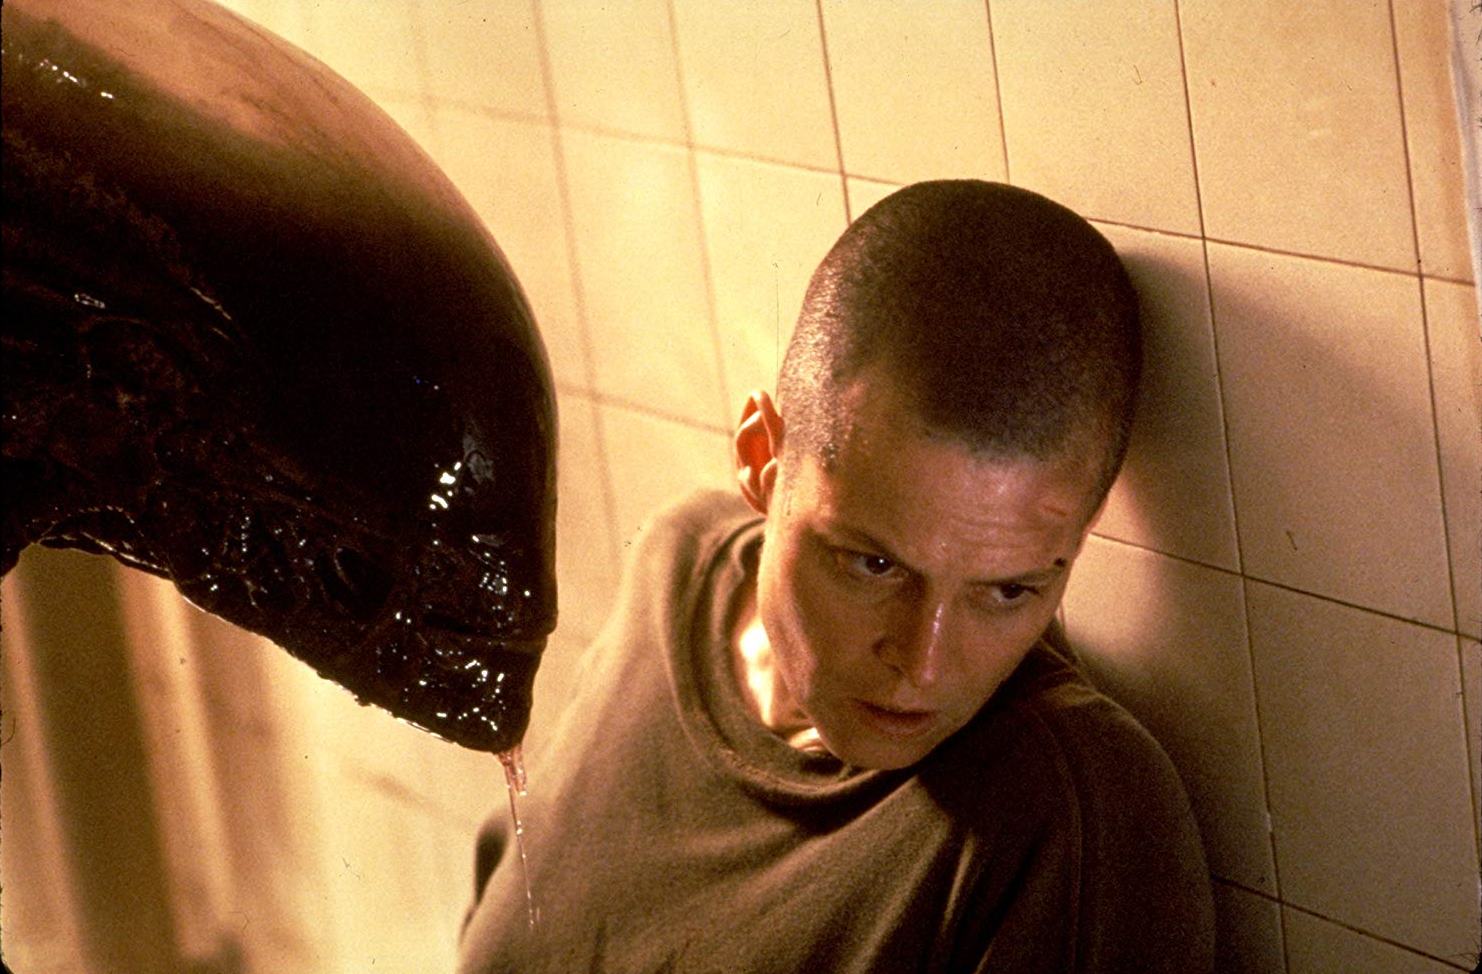 Ripley (Sigourney Weaver) face to face with her alien nemesis again in Alien3 (1992)